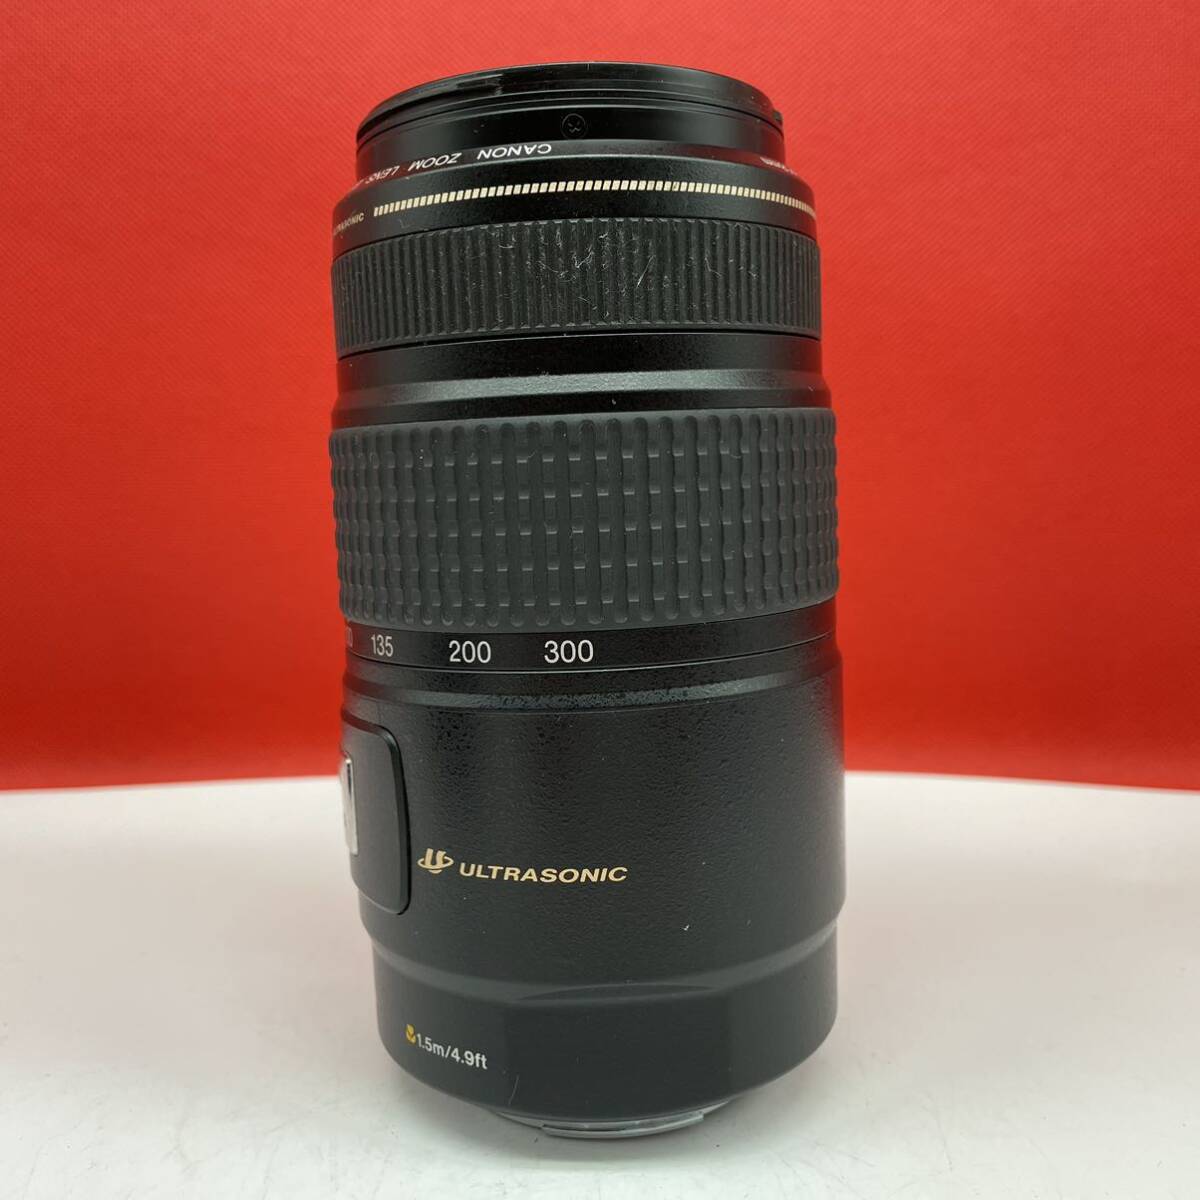 * Canon ZOOM LENS EF 75-300mm F4-5.6 IS ULTRASONIC camera lens AF operation verification settled Canon 